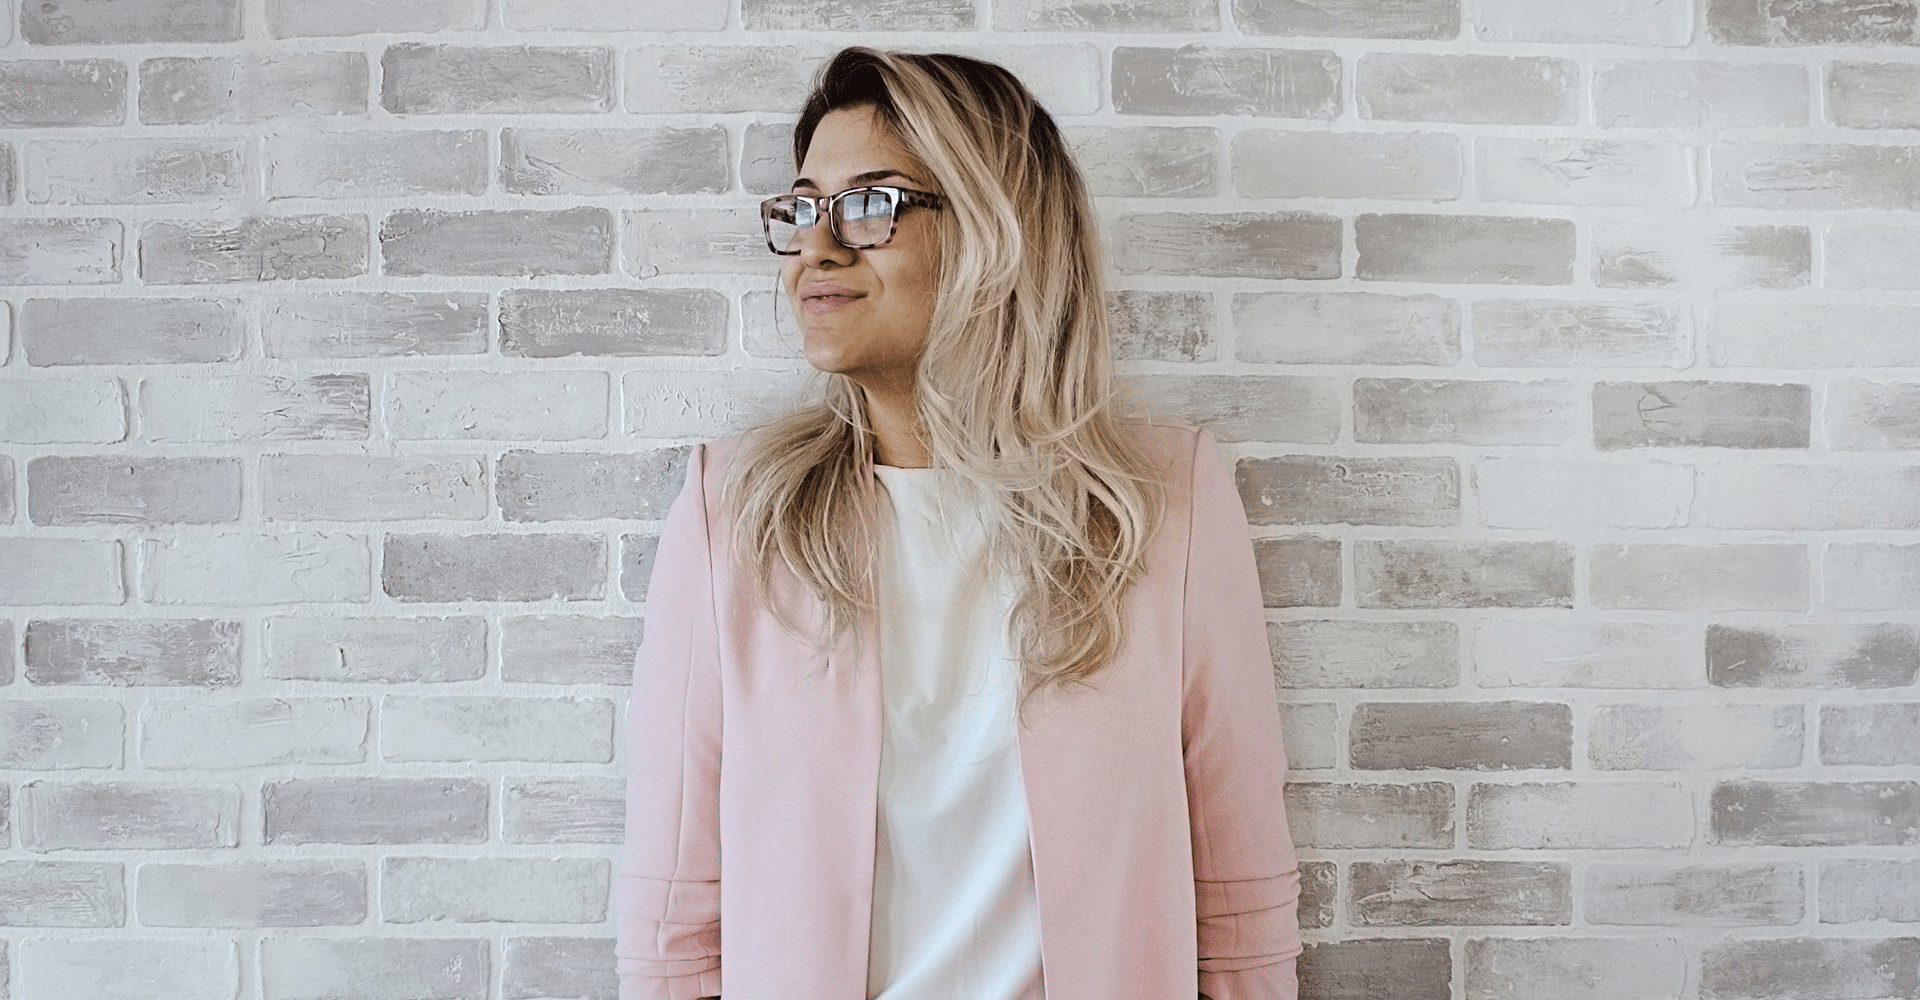 millennial woman with blonde hair wearing pink jacket leaning against light brick wall